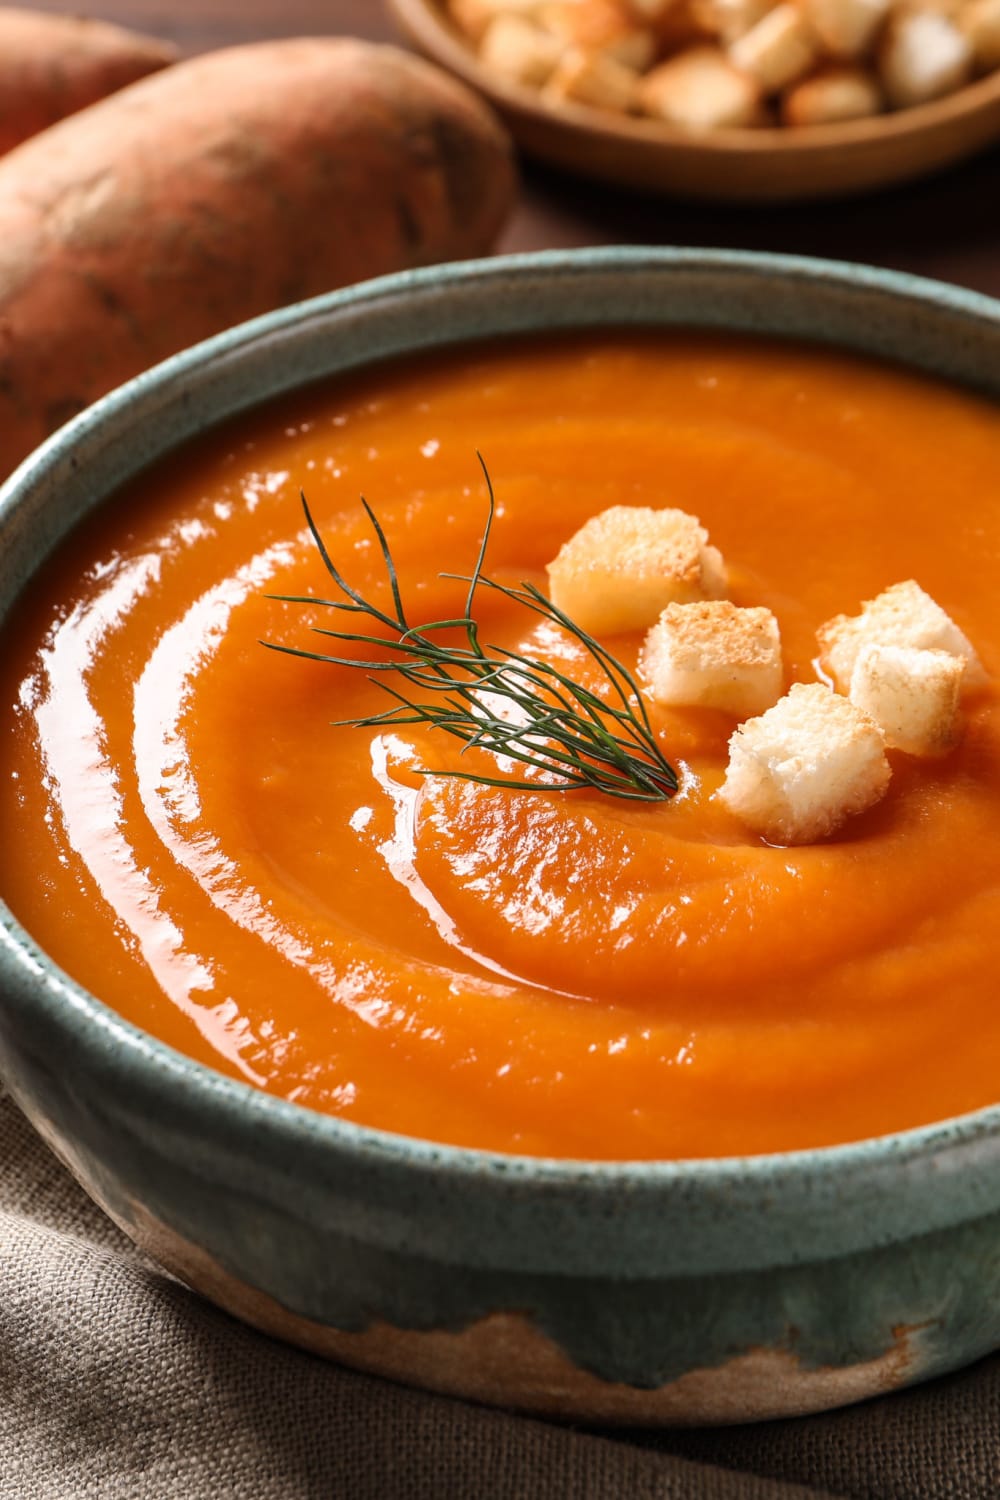 Sweet Potato Soup with Croutons in a Ceramic Bowl